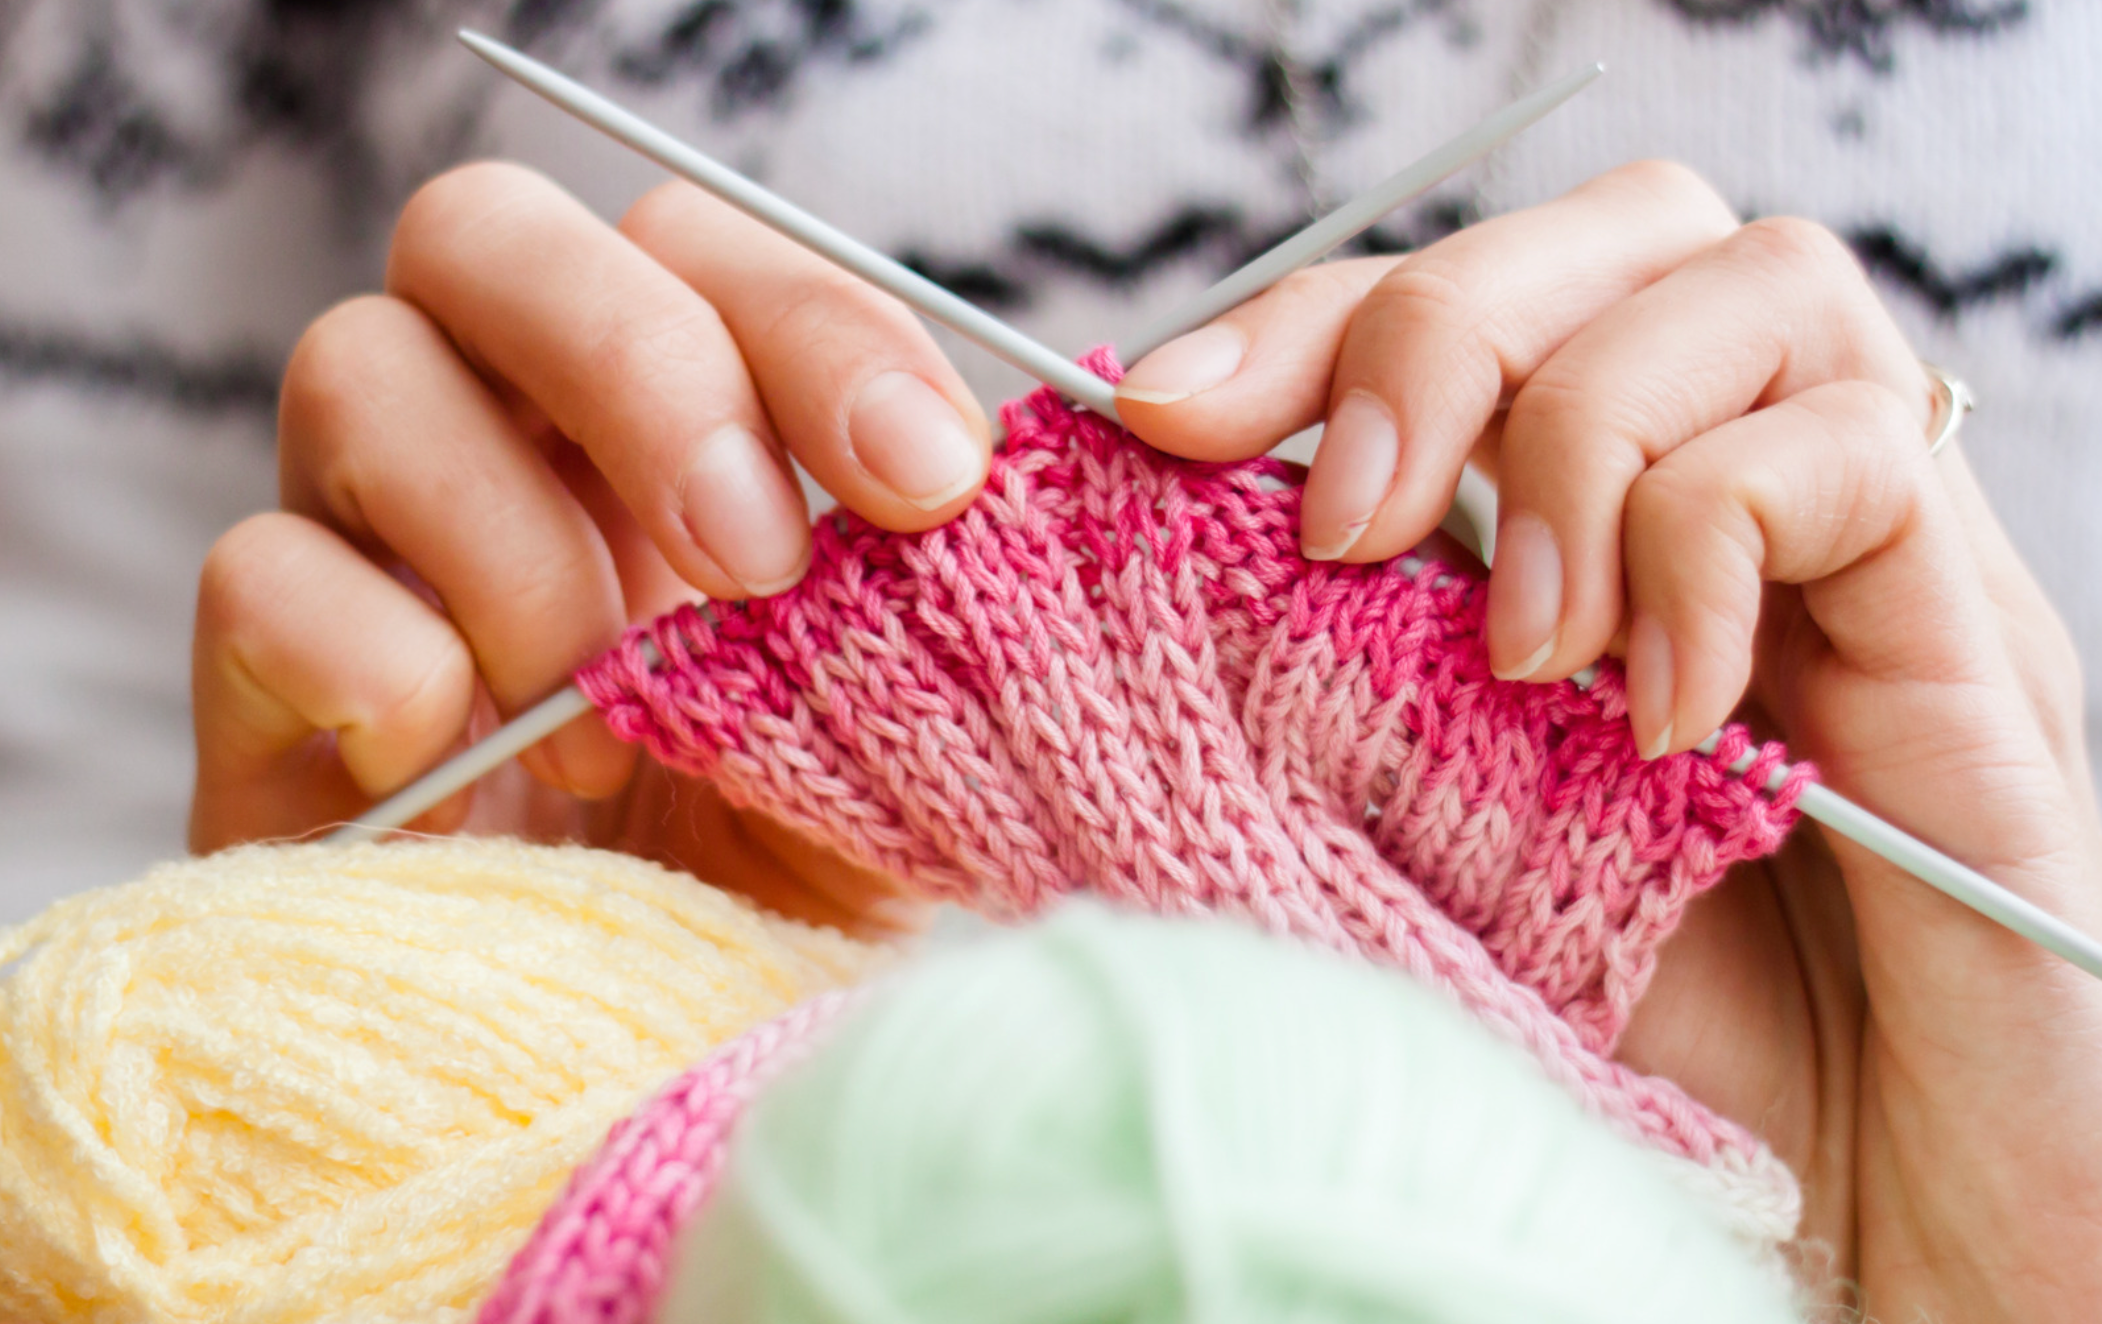 Knitting vs Crochet. What's the difference?